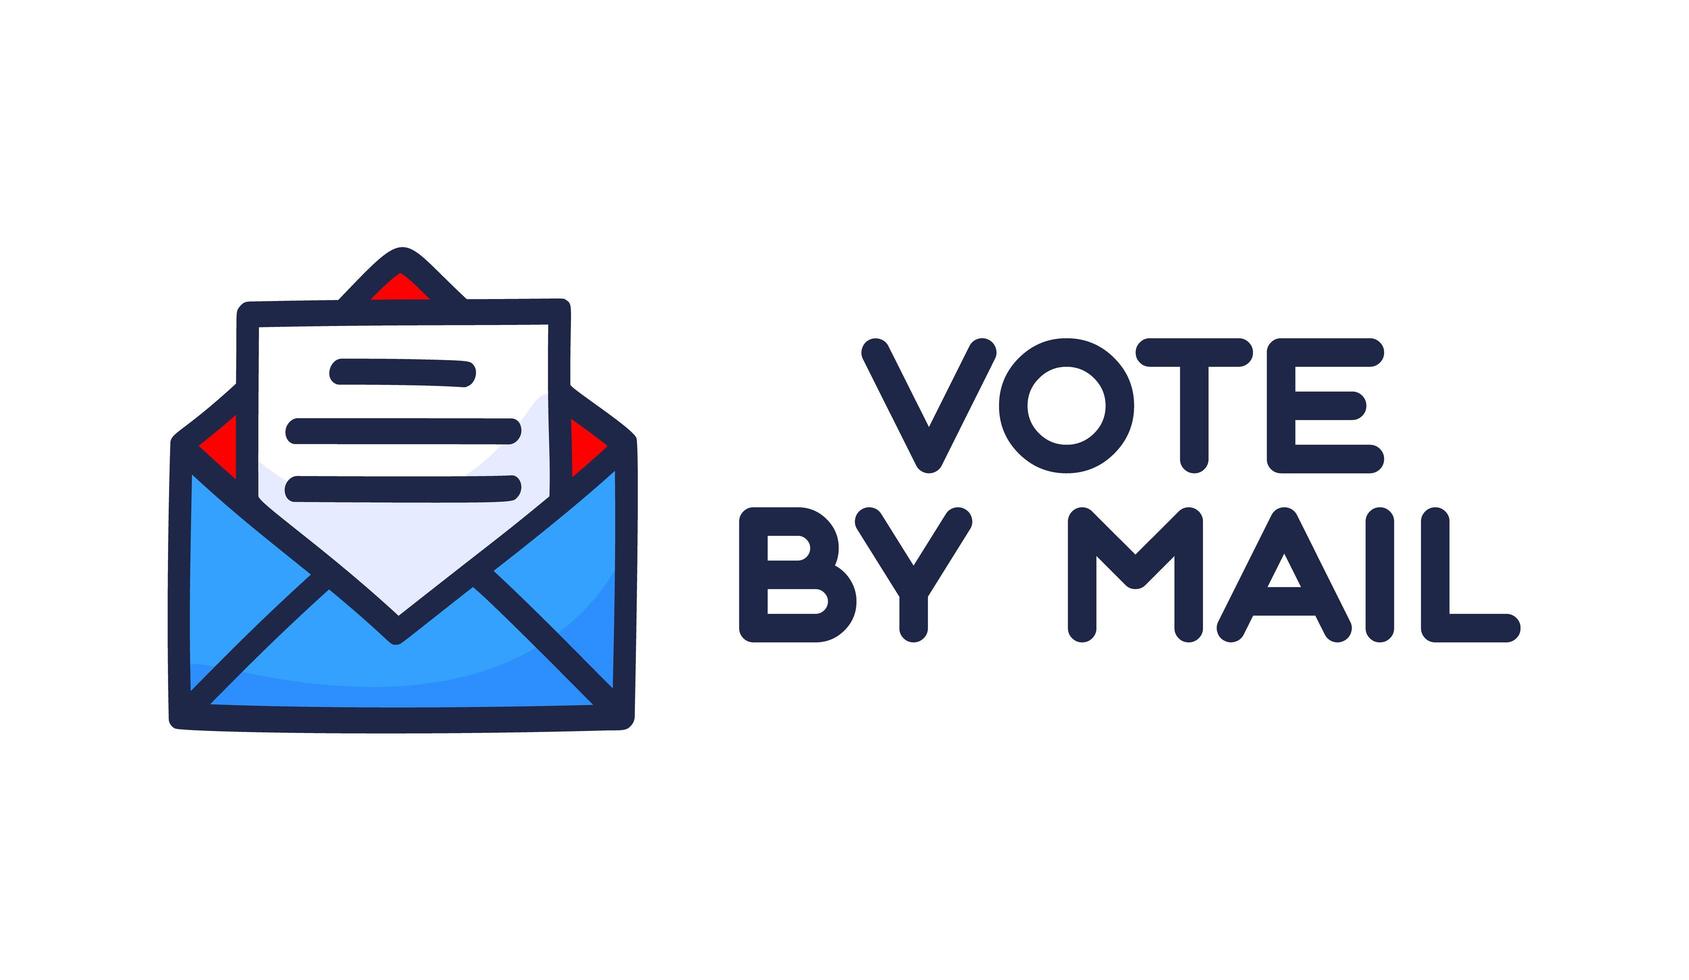 Vote by Mail Vector Illustration. Stay Safe Concept for the 2020 United States Presidential Election. Template for Background, Banner, Card, Poster With Text Inscription.